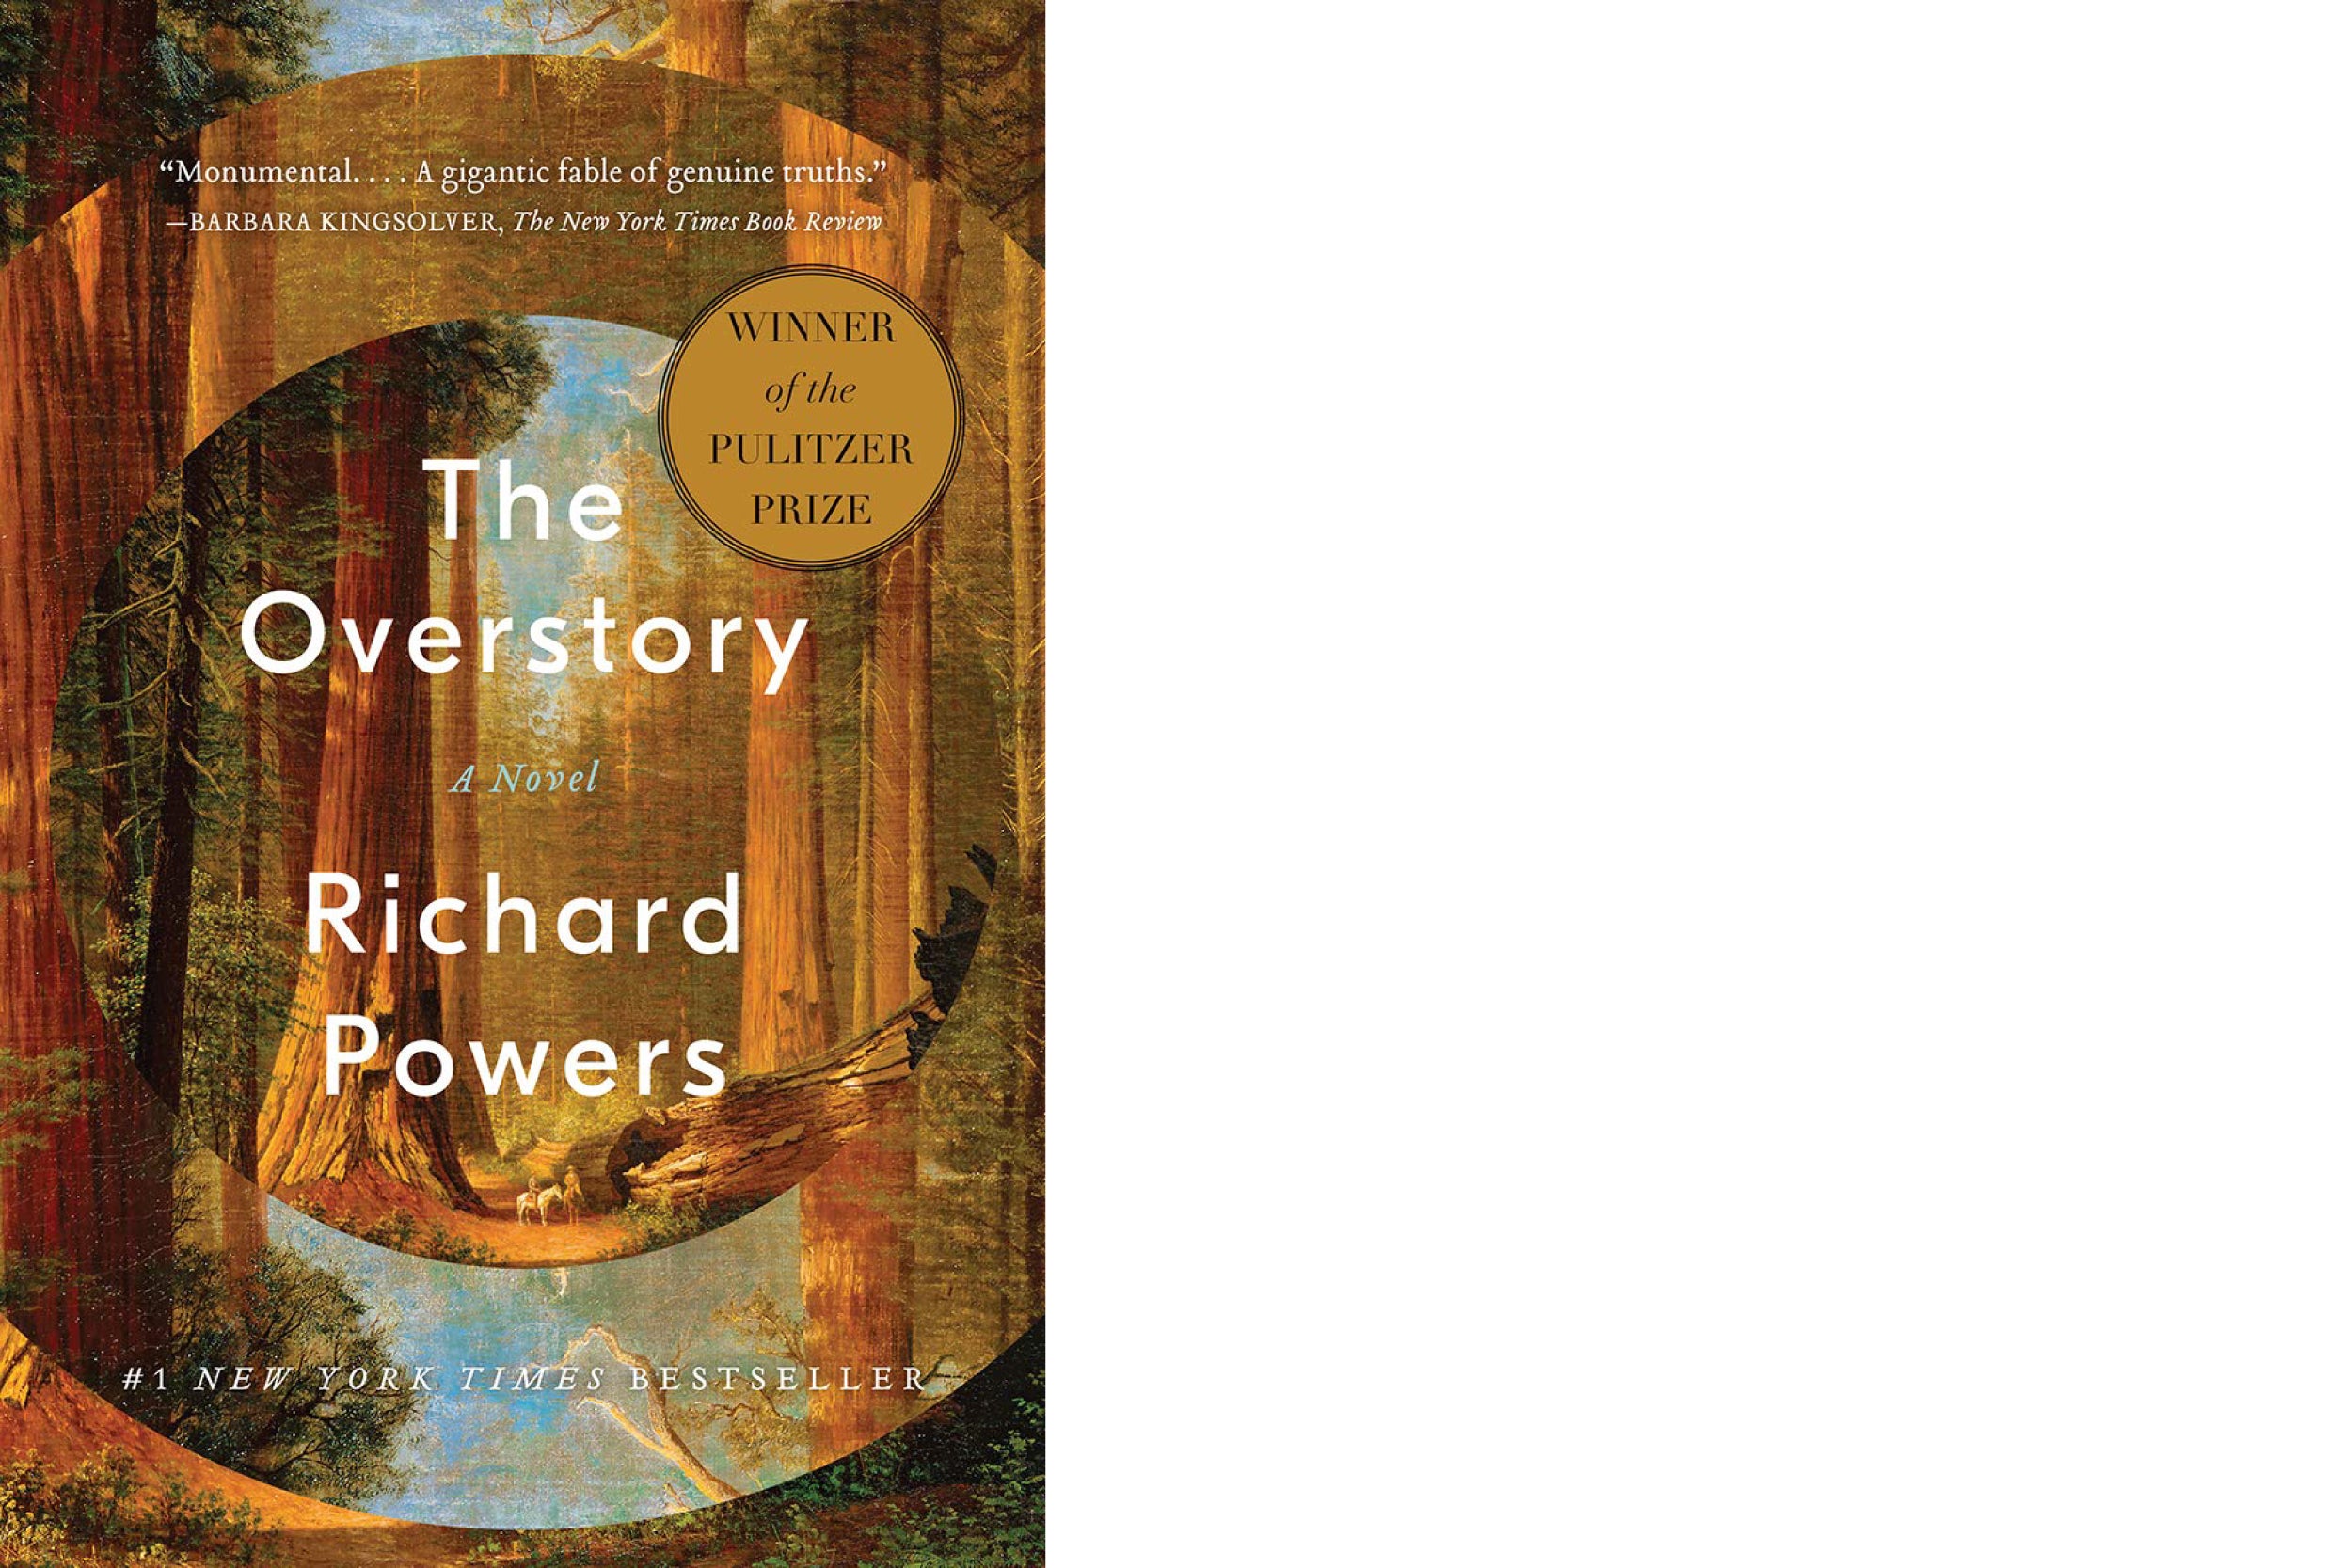 Book cover: “The Overstory” by Richard Powers.